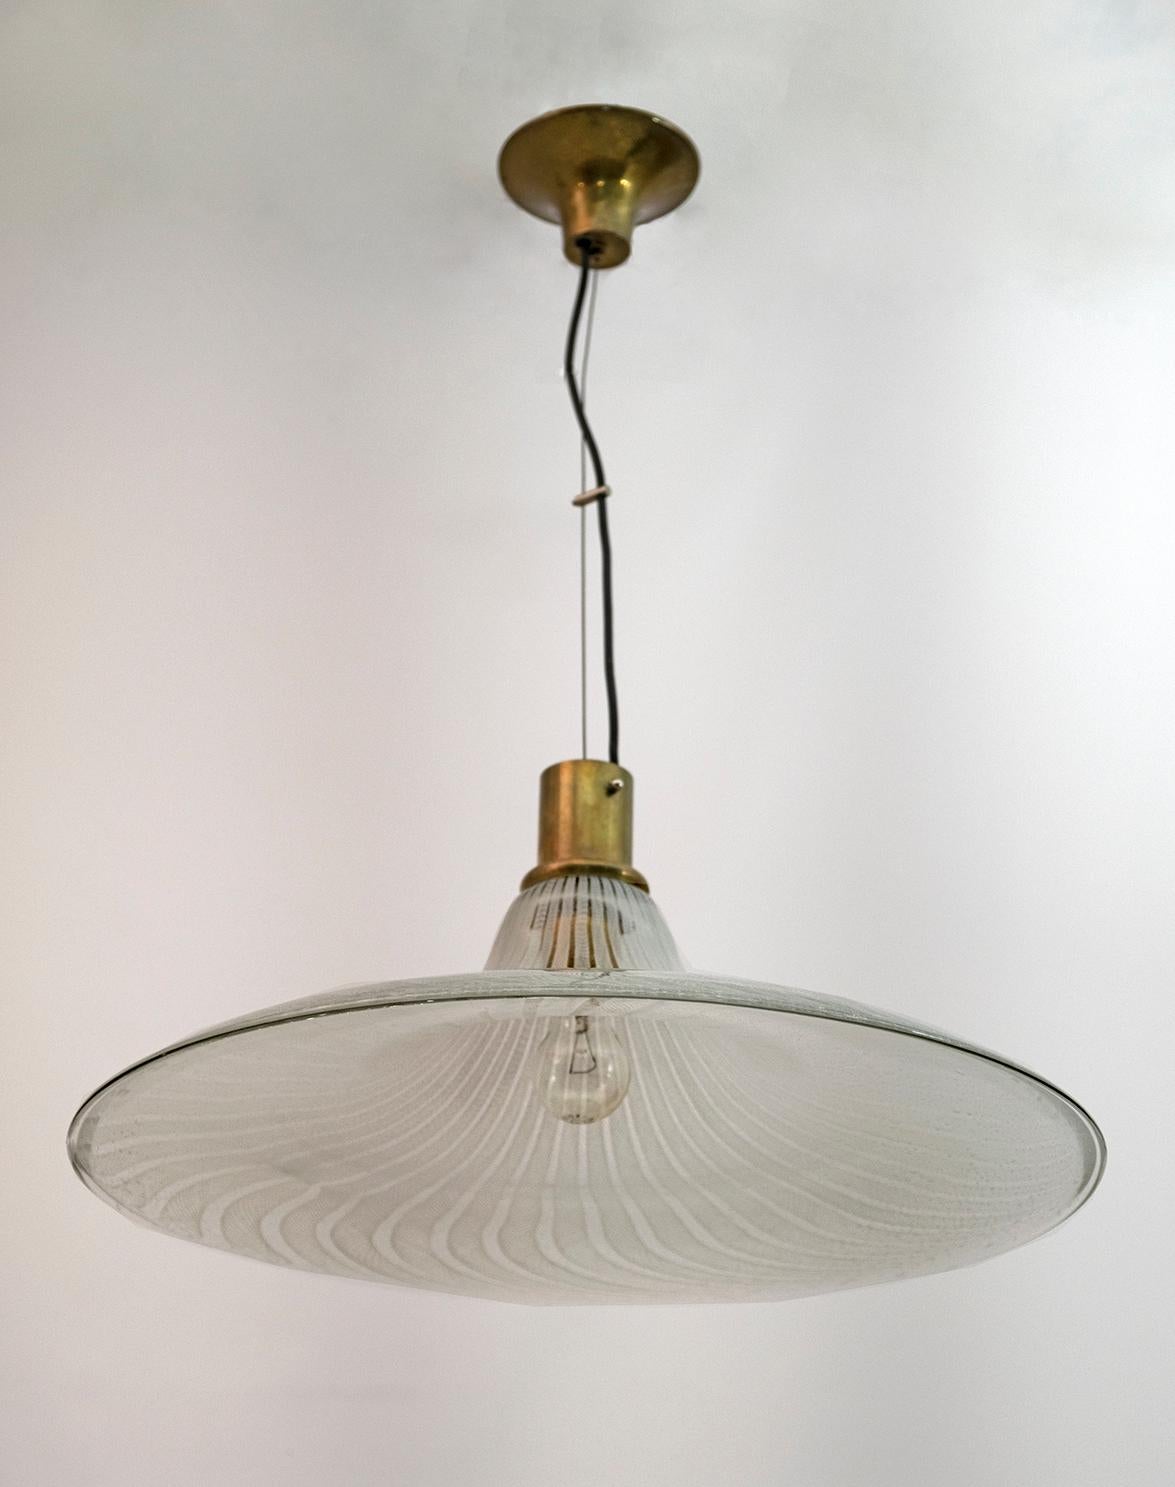 Superb suspension lamp in Murano glass, attributed to Seguso, technique of production of blown glass with air bubbles and spiral and reticello shape.